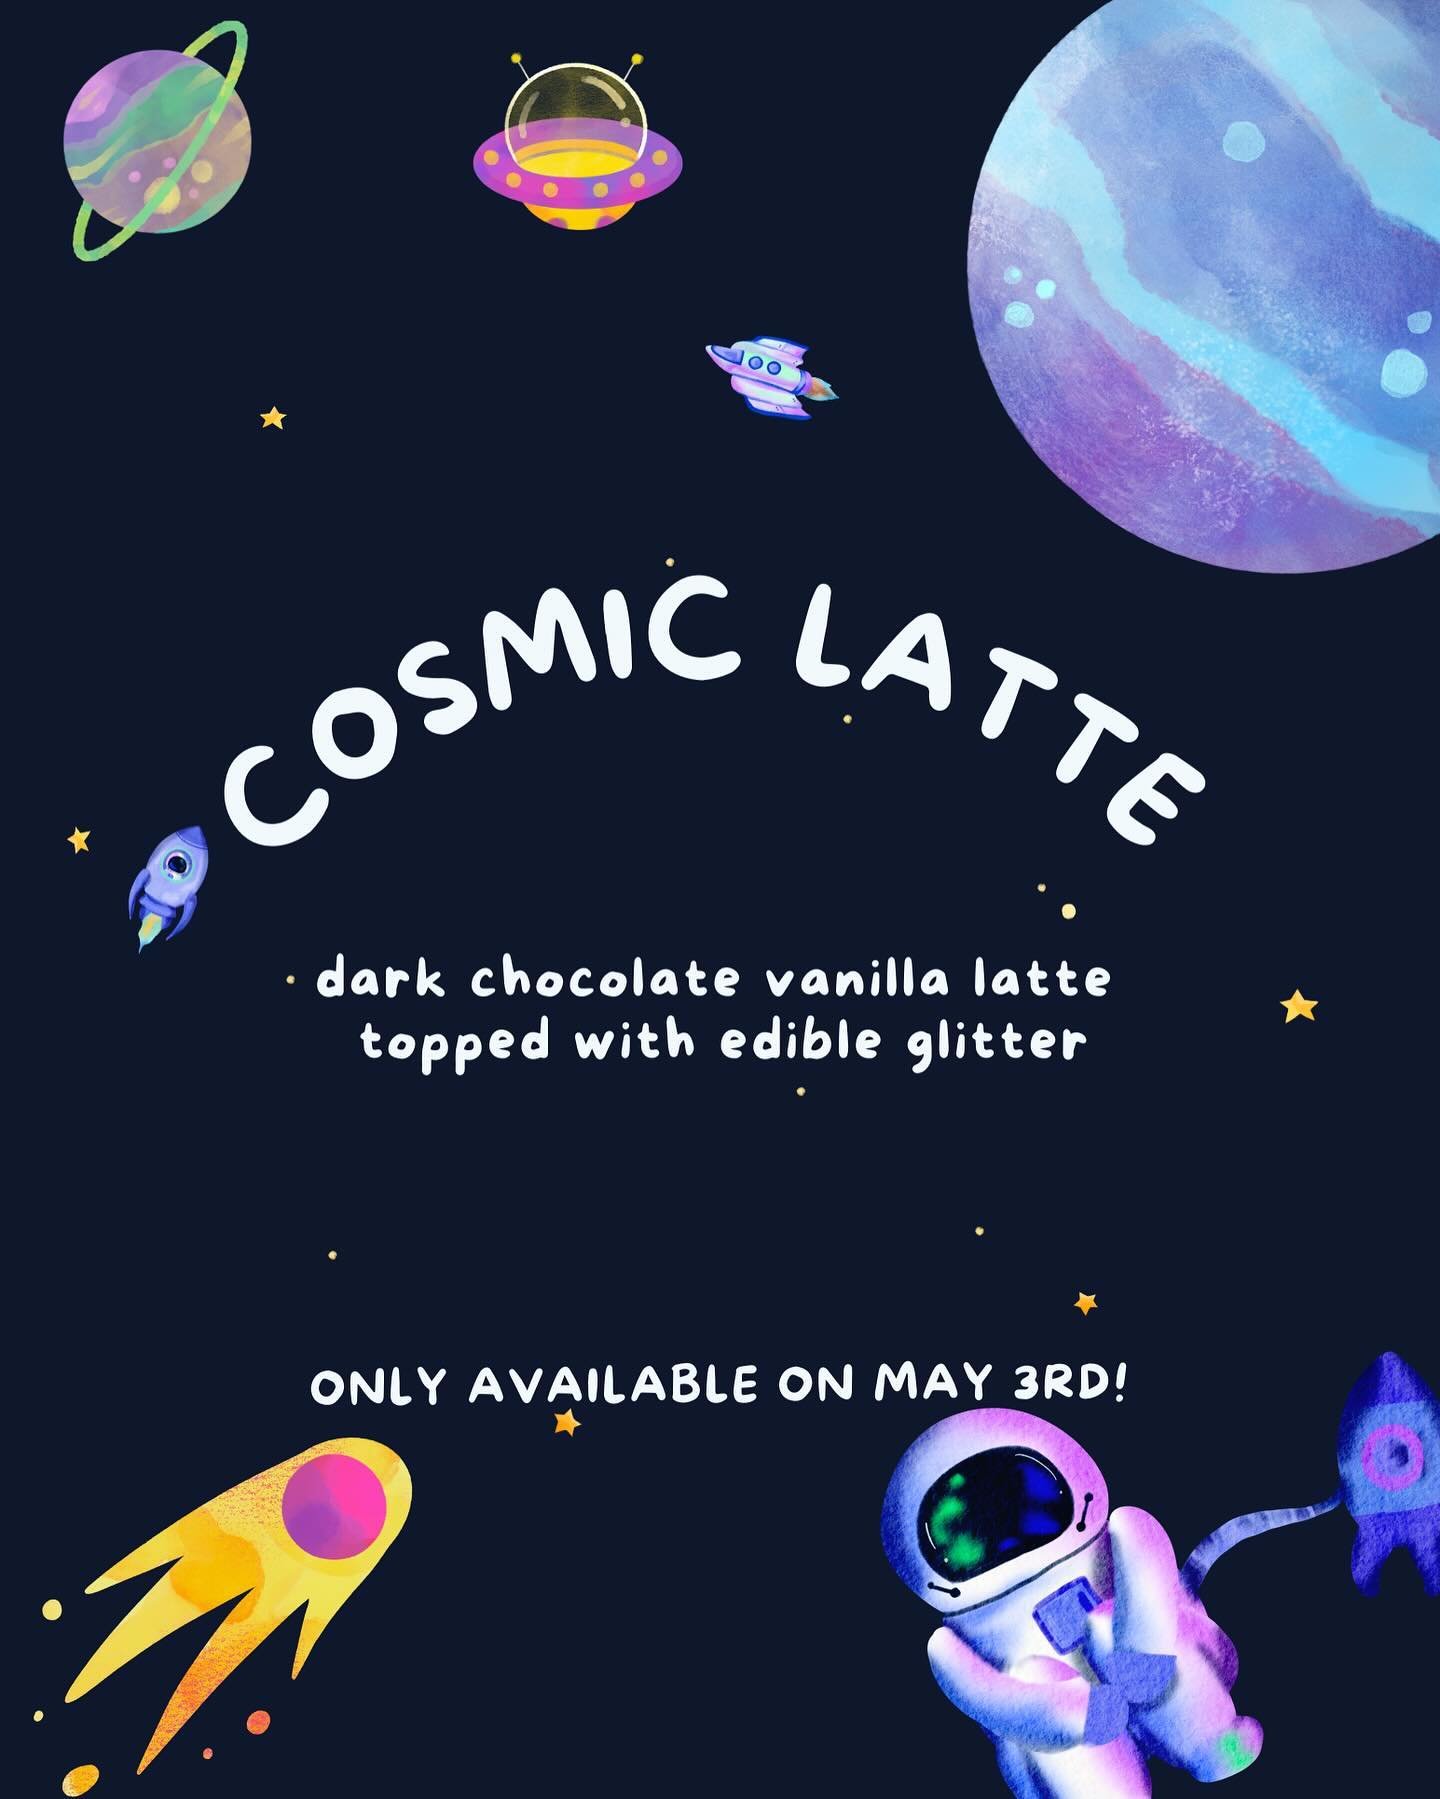 Happy National Space Day 🔭🪐👽🛸

We are celebrating with our new cosmic latte that is out of this world delicious! 😋

TOMORROW we are having two fun drinks on the menu 
🪐 Bantha Milk
🪐 Chai-Bacca 

Both are coffee free, but you can add espresso 